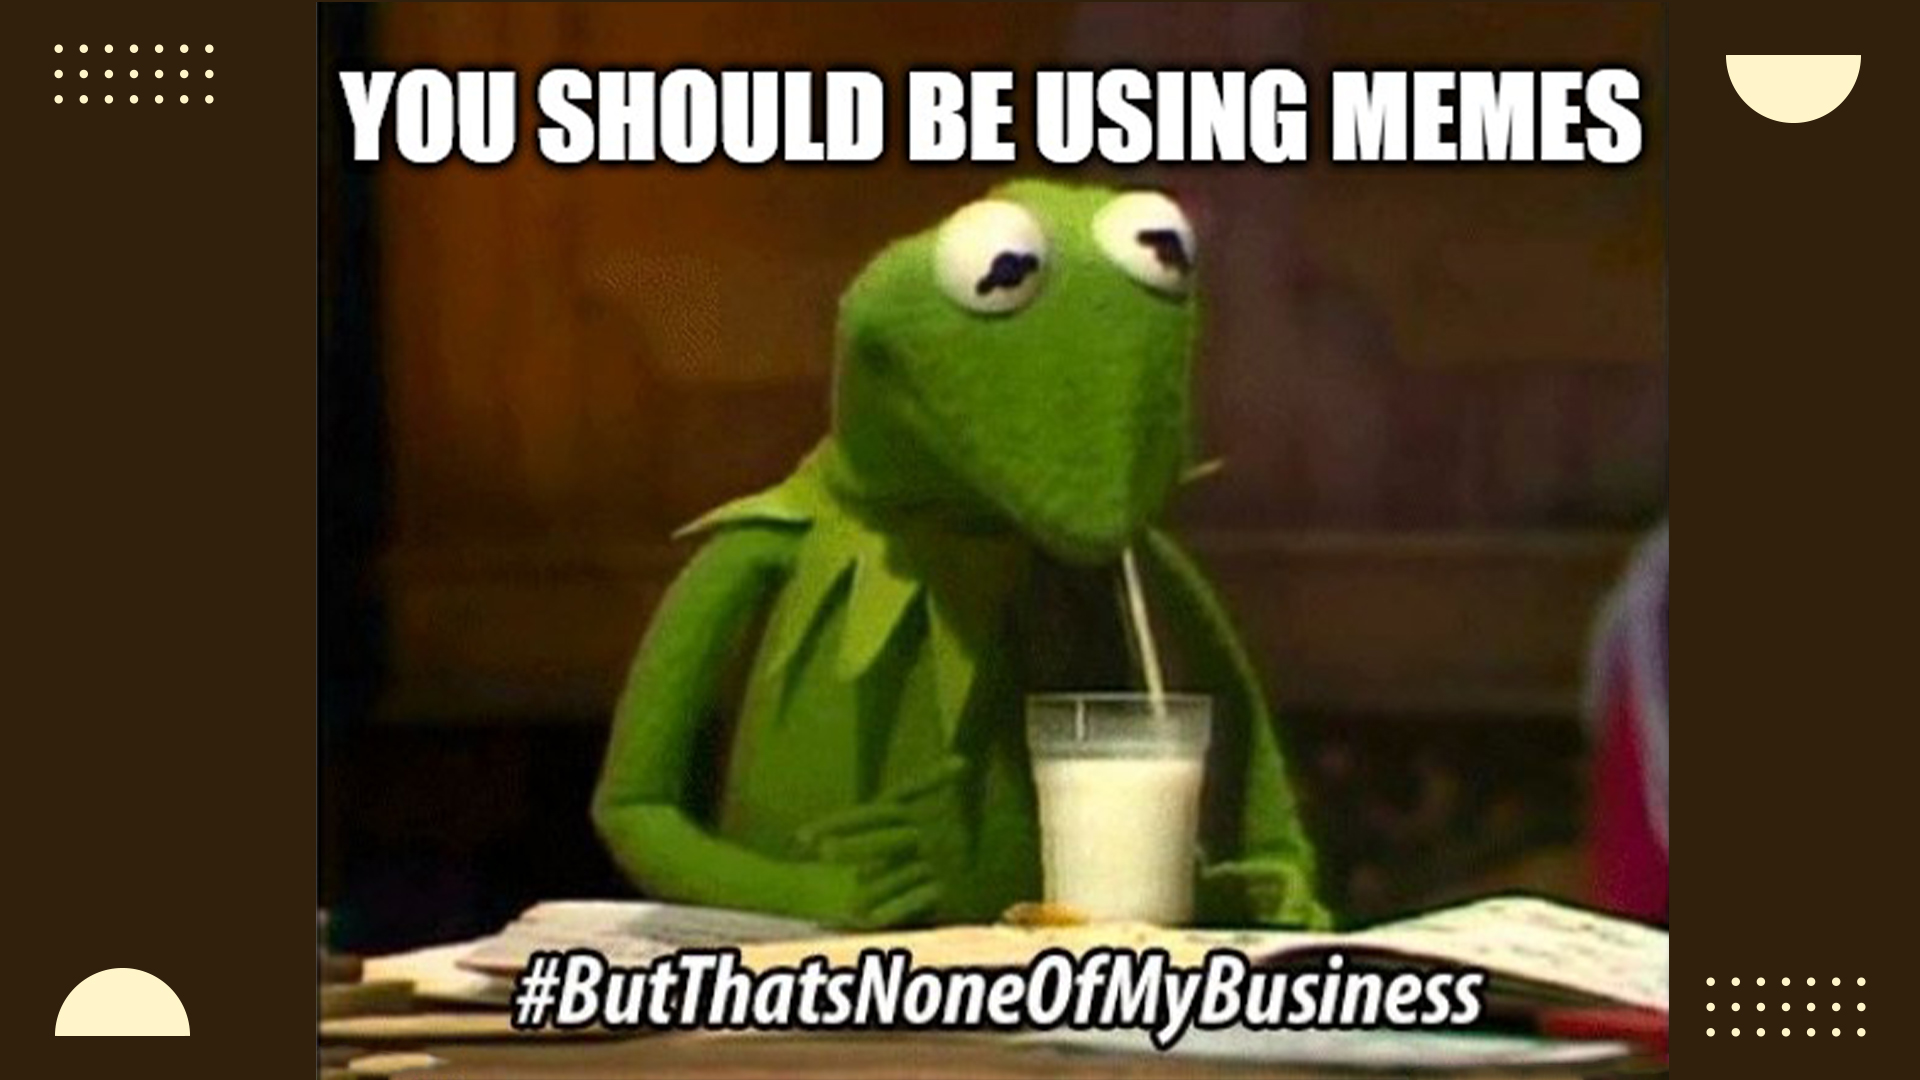 Meme Marketing : The Next-Gen of Advertising (Plus Free Business and Social Media Memes)